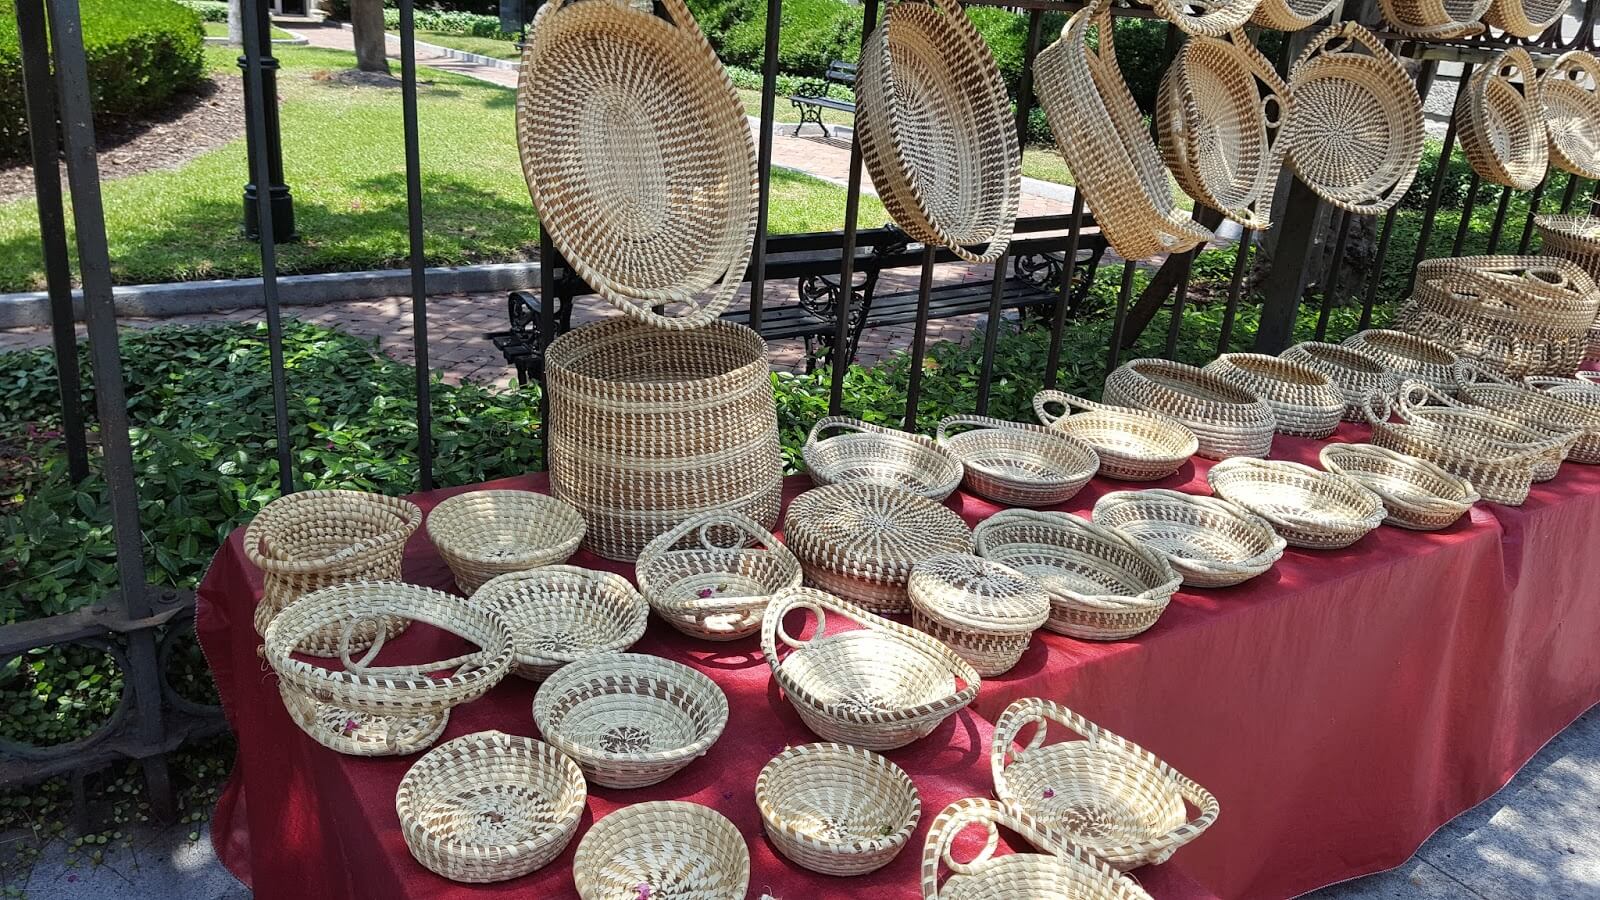 Lowcountry of Charleston SC - sweet grass baskets made by the descendants of the enslaved African people. Geechee Gullah culture 